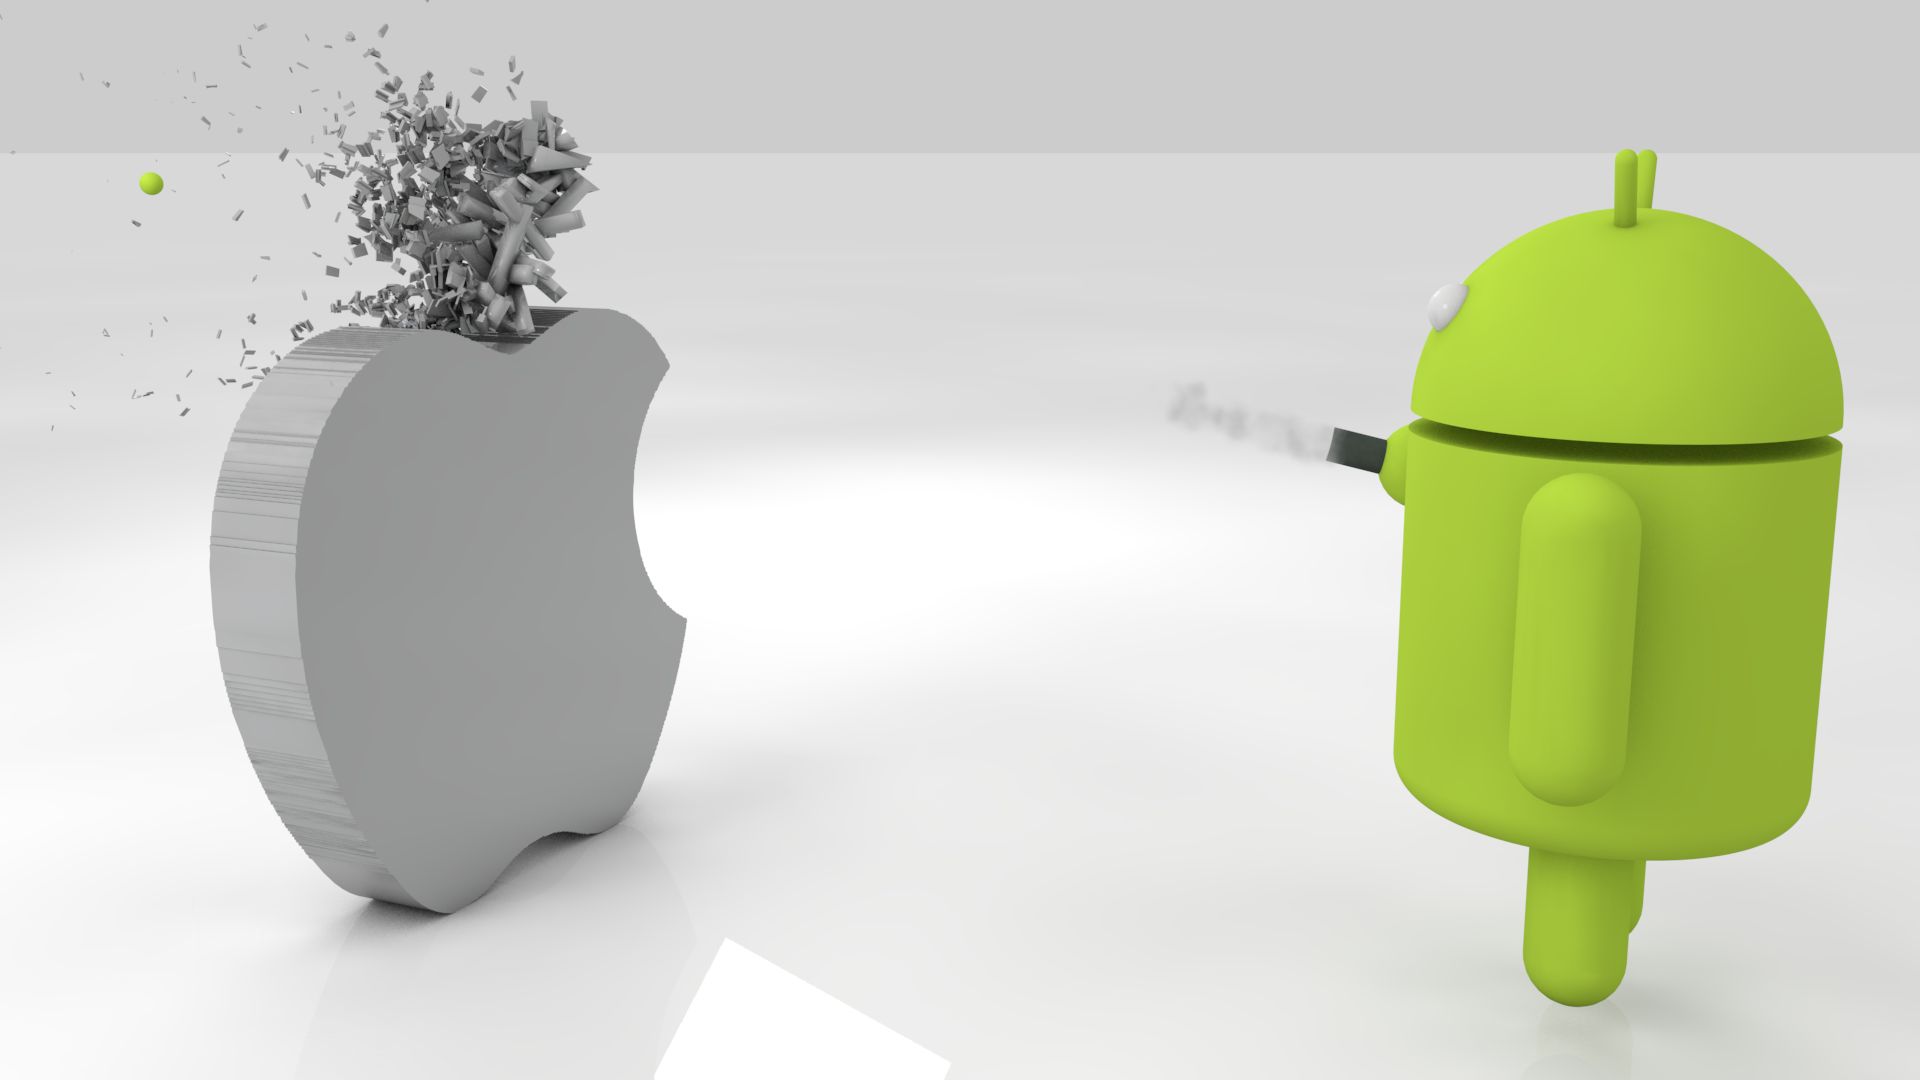 android vs apple funny wallpapers android vs apple funny wallpapers